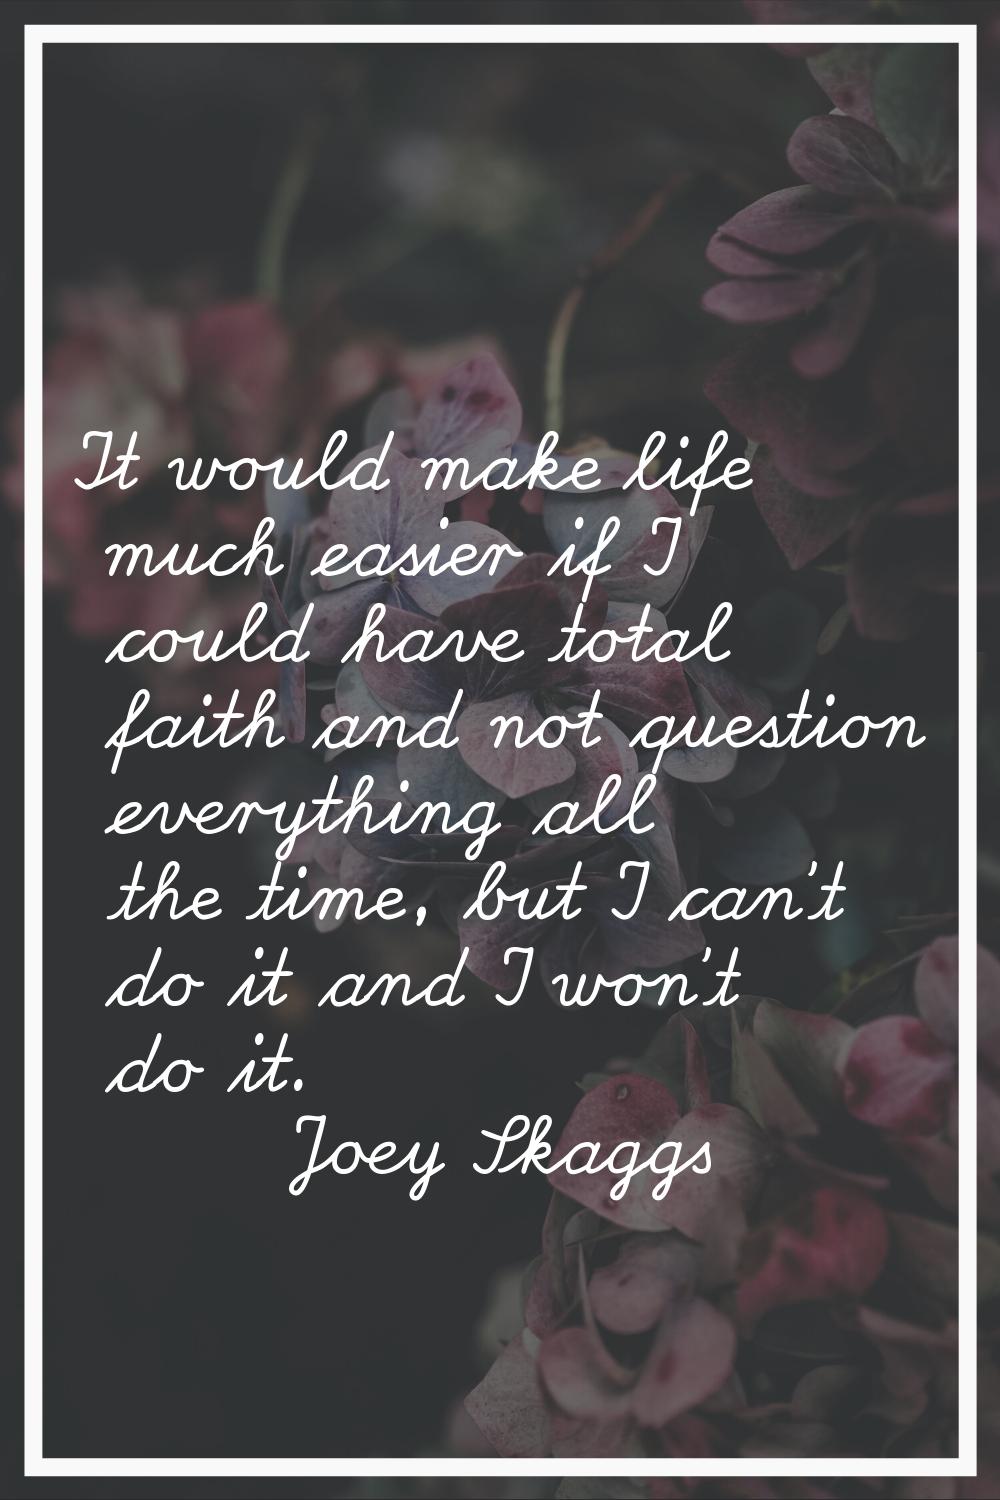 It would make life much easier if I could have total faith and not question everything all the time